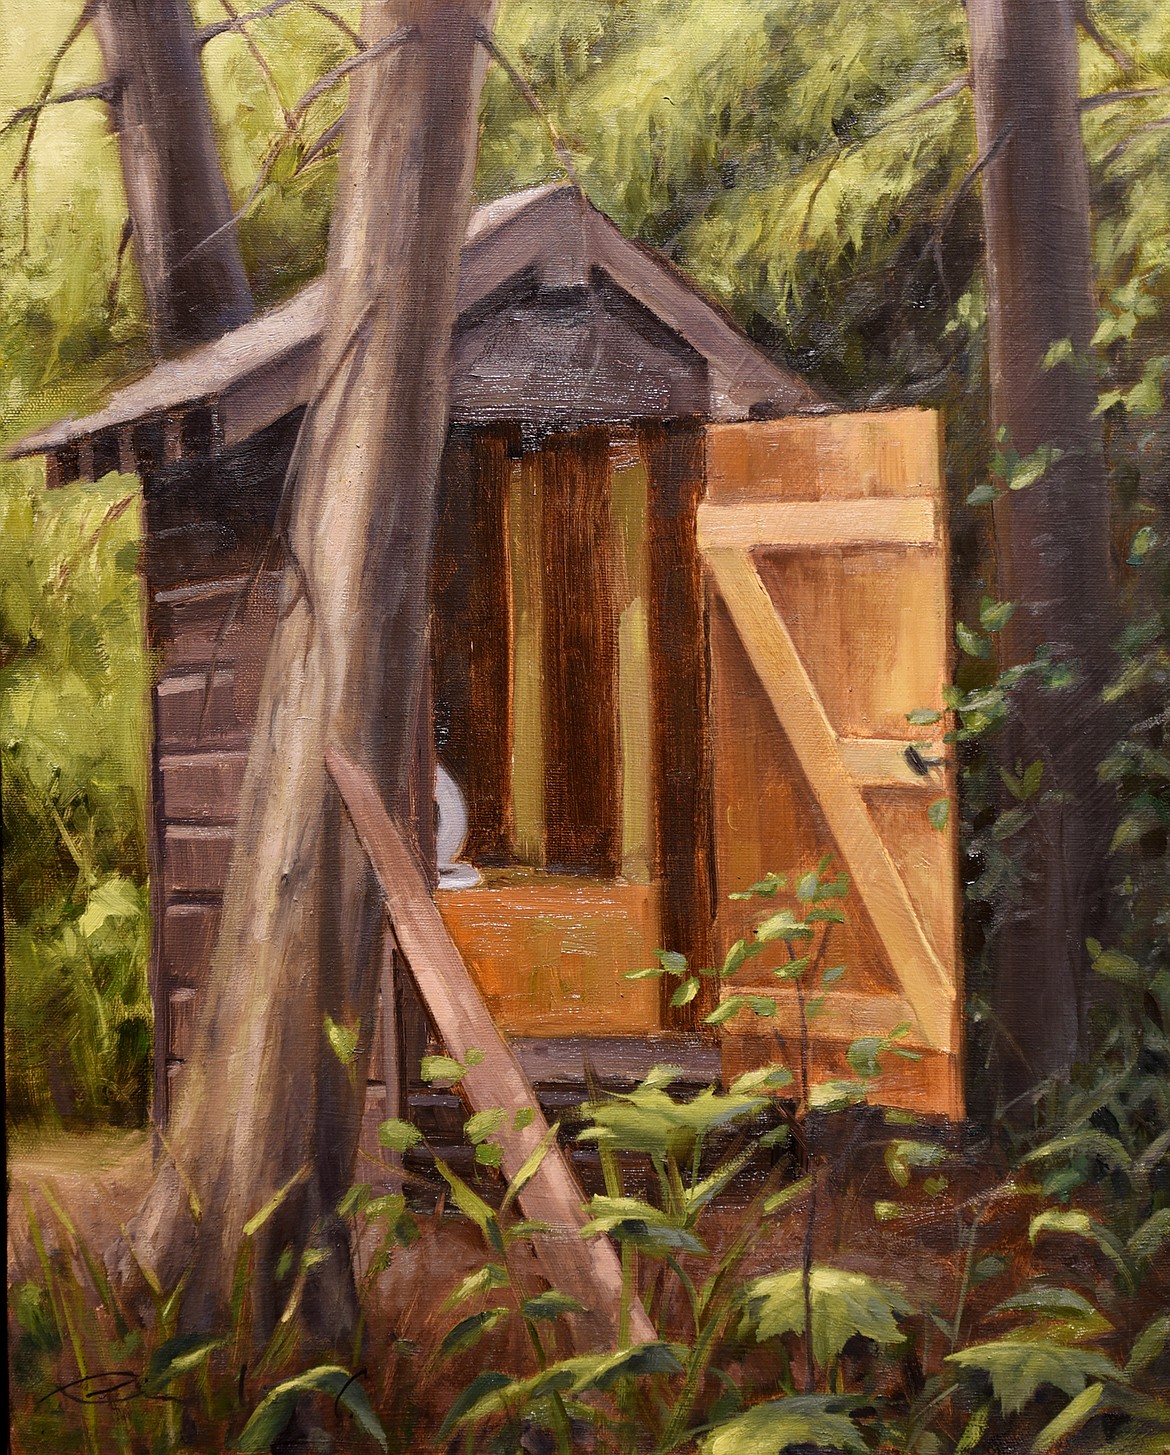 THIS PAINTING is part of the reality of their Artist-Wilderness Connection experience: the outhouse, by Richie Carter. (Brenda Ahearn/This Week in the Flathead)